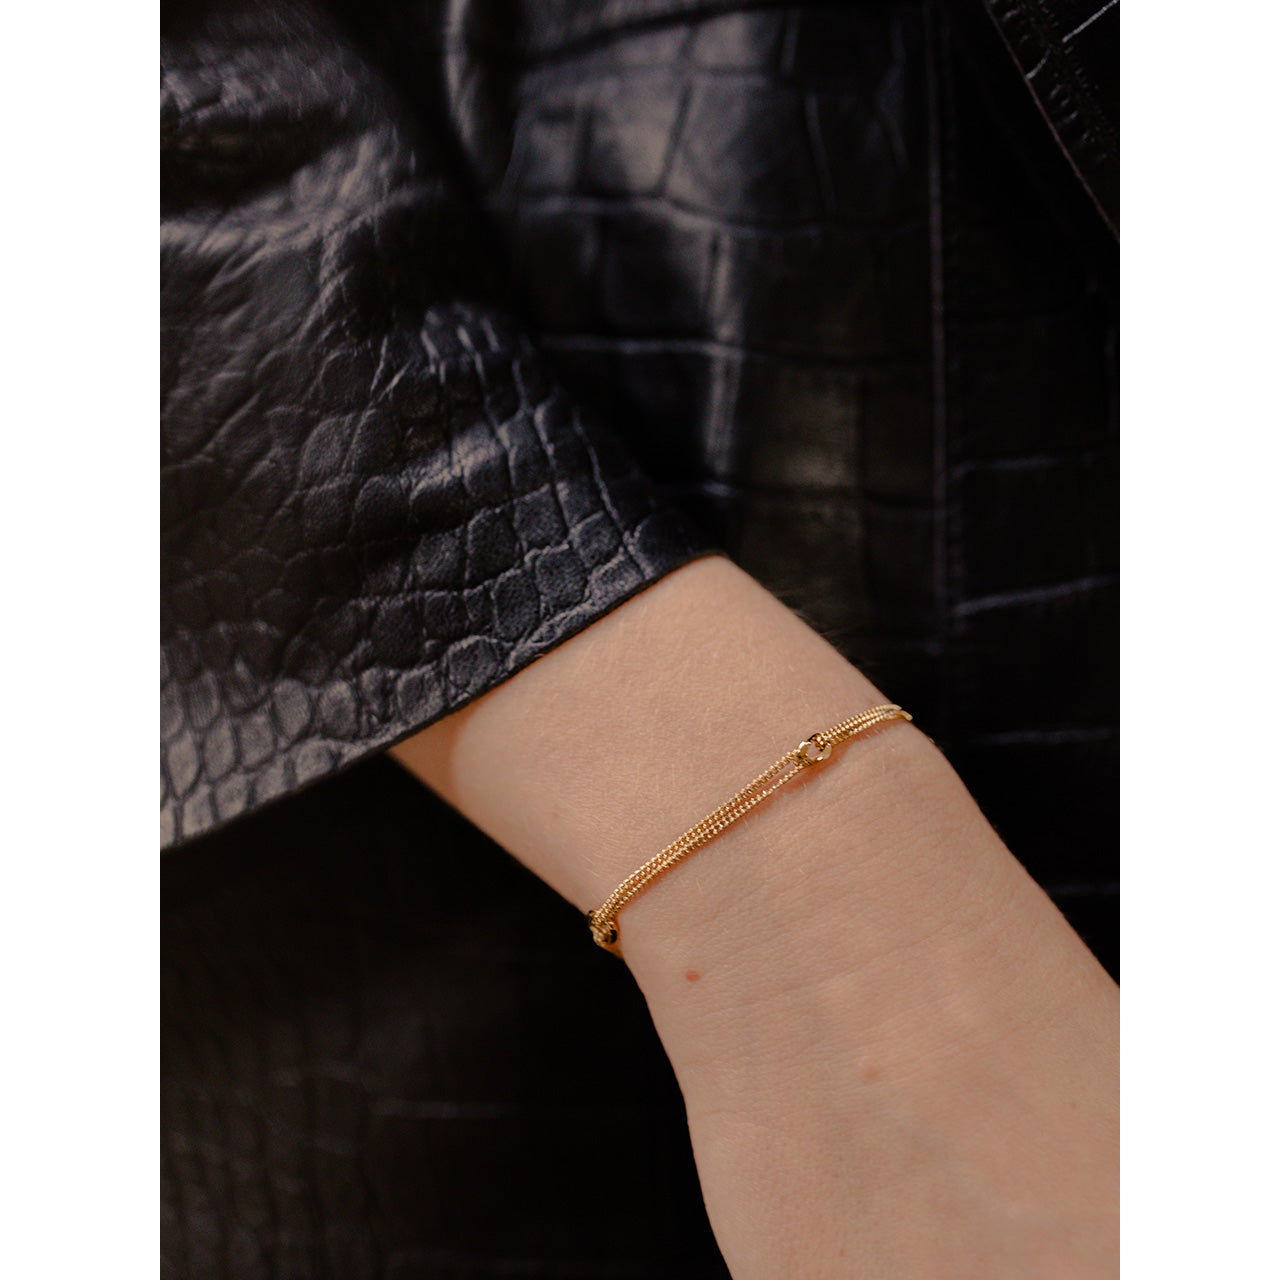 This bracelet is a delicate nod to our admiration for chains, a design element that has been prominently featured in our collections for the past decade.